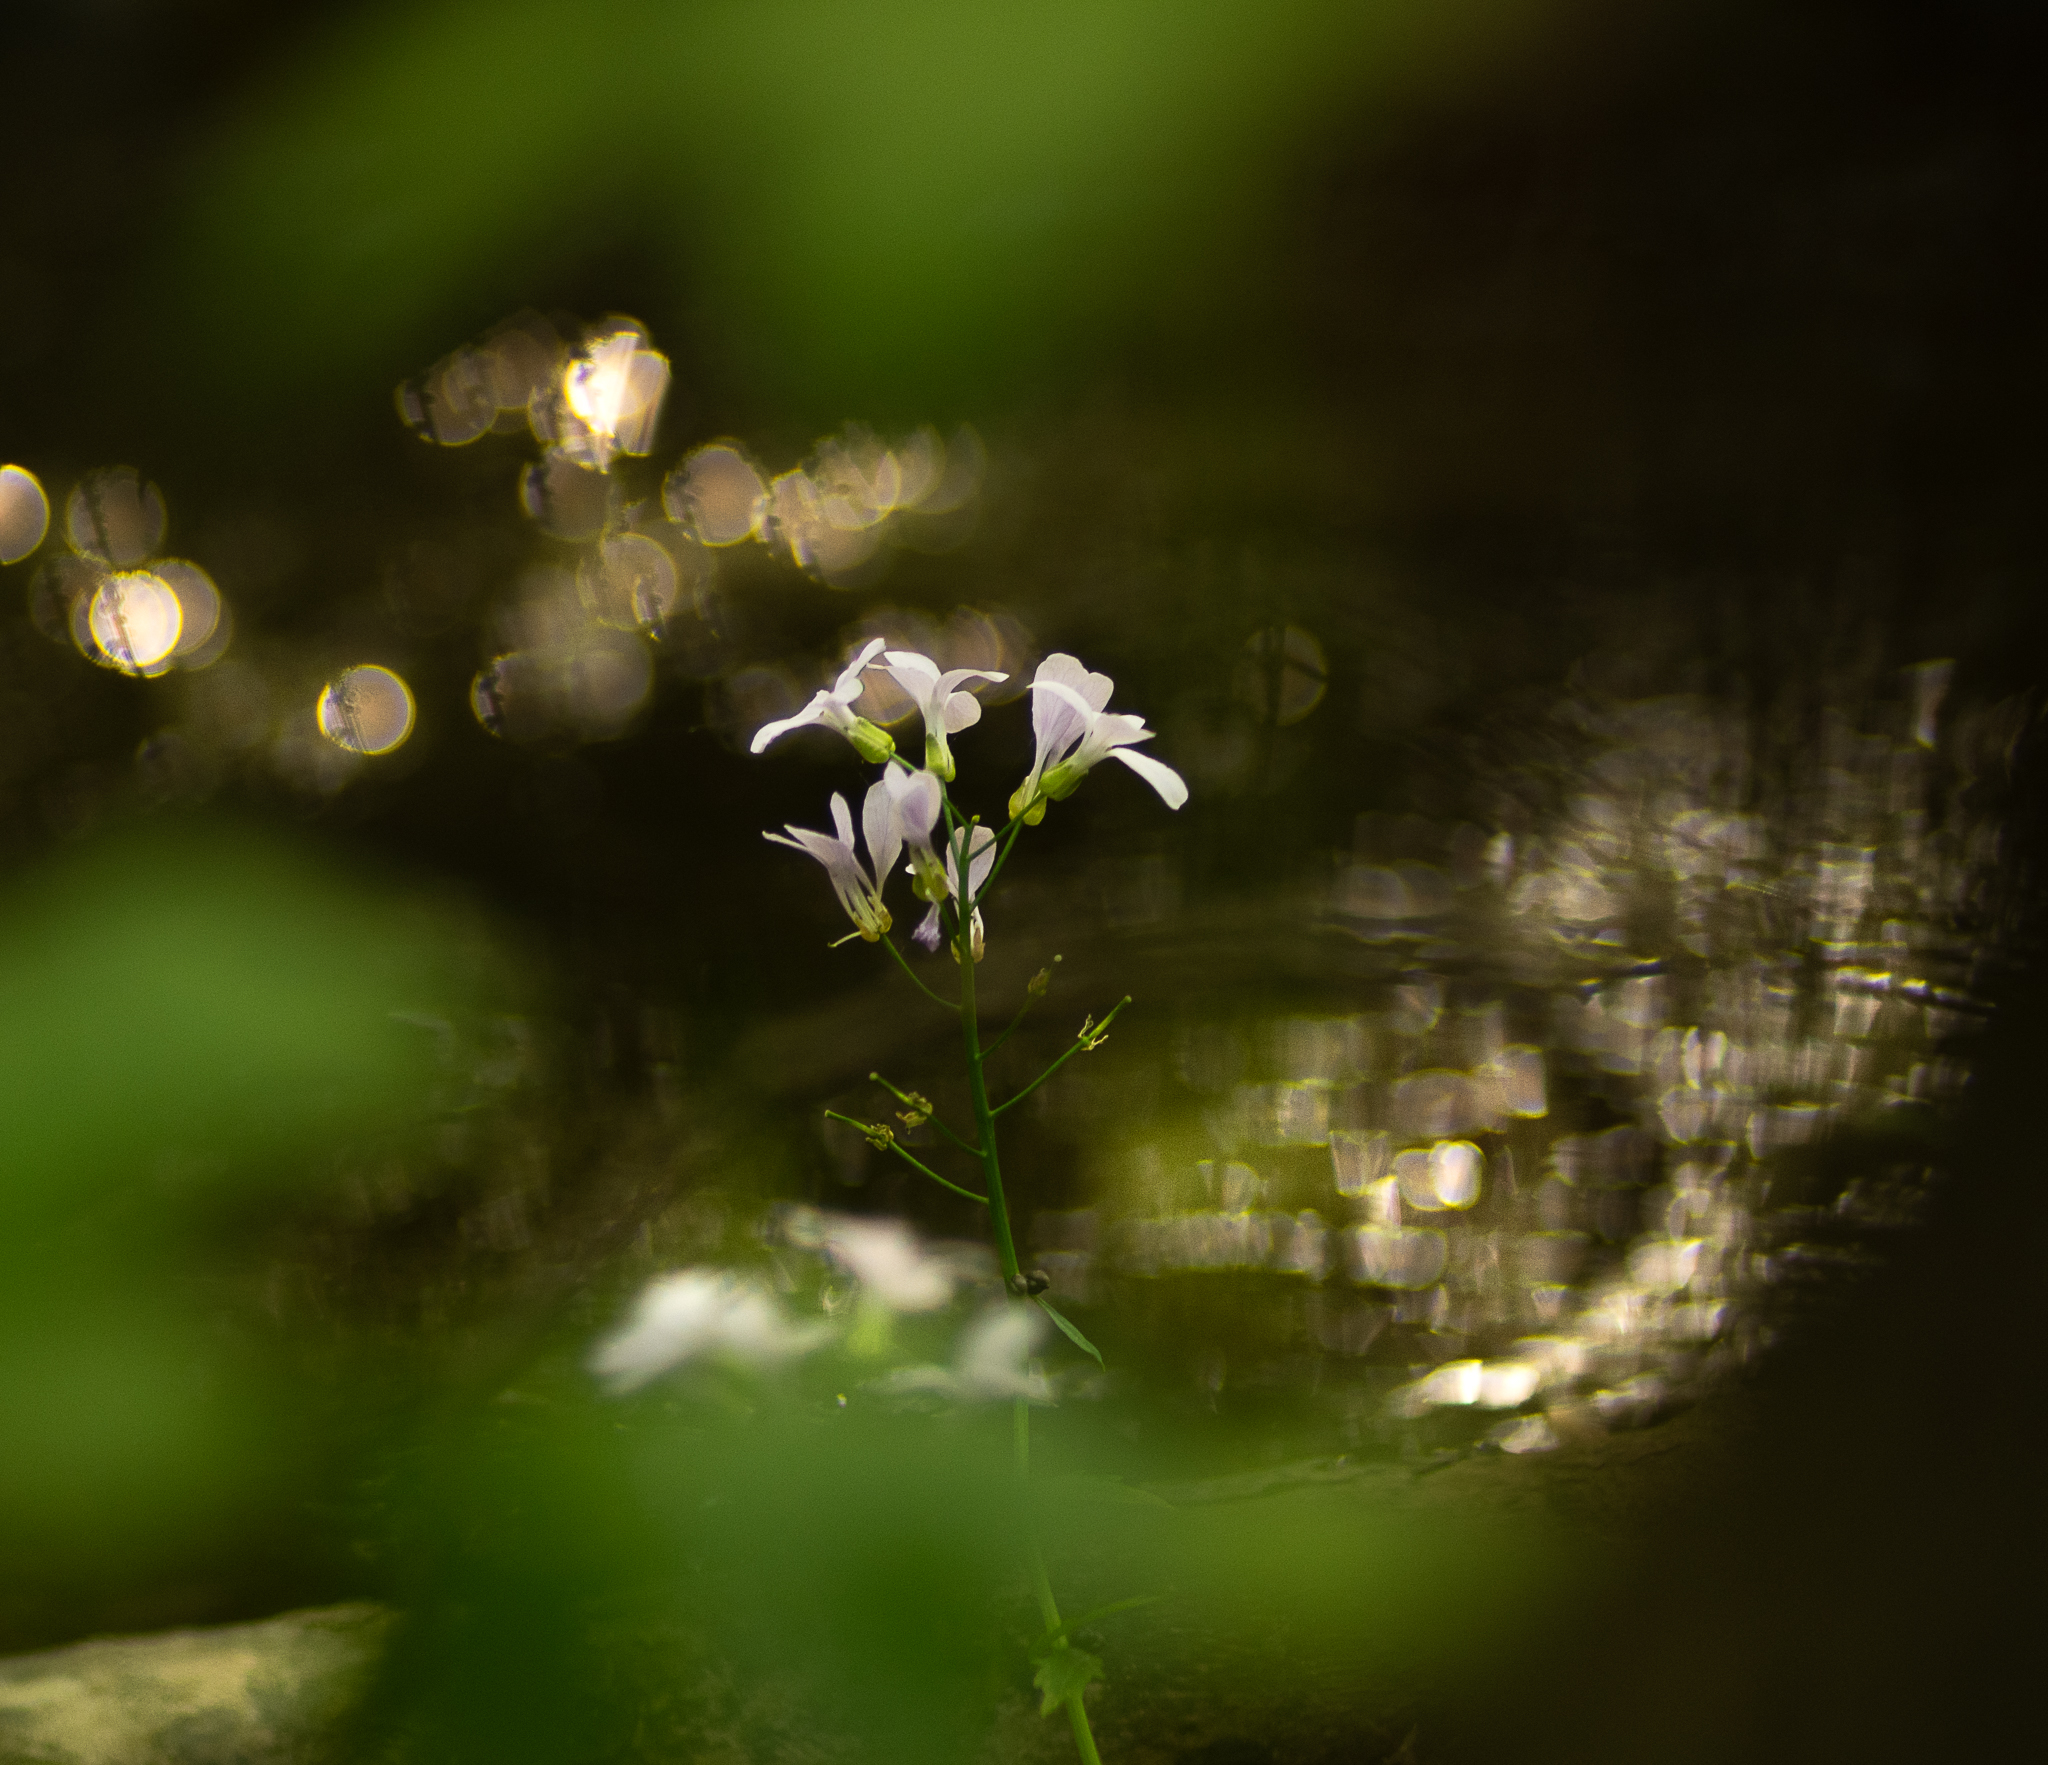 Between the leaves (flowers and reflections)...